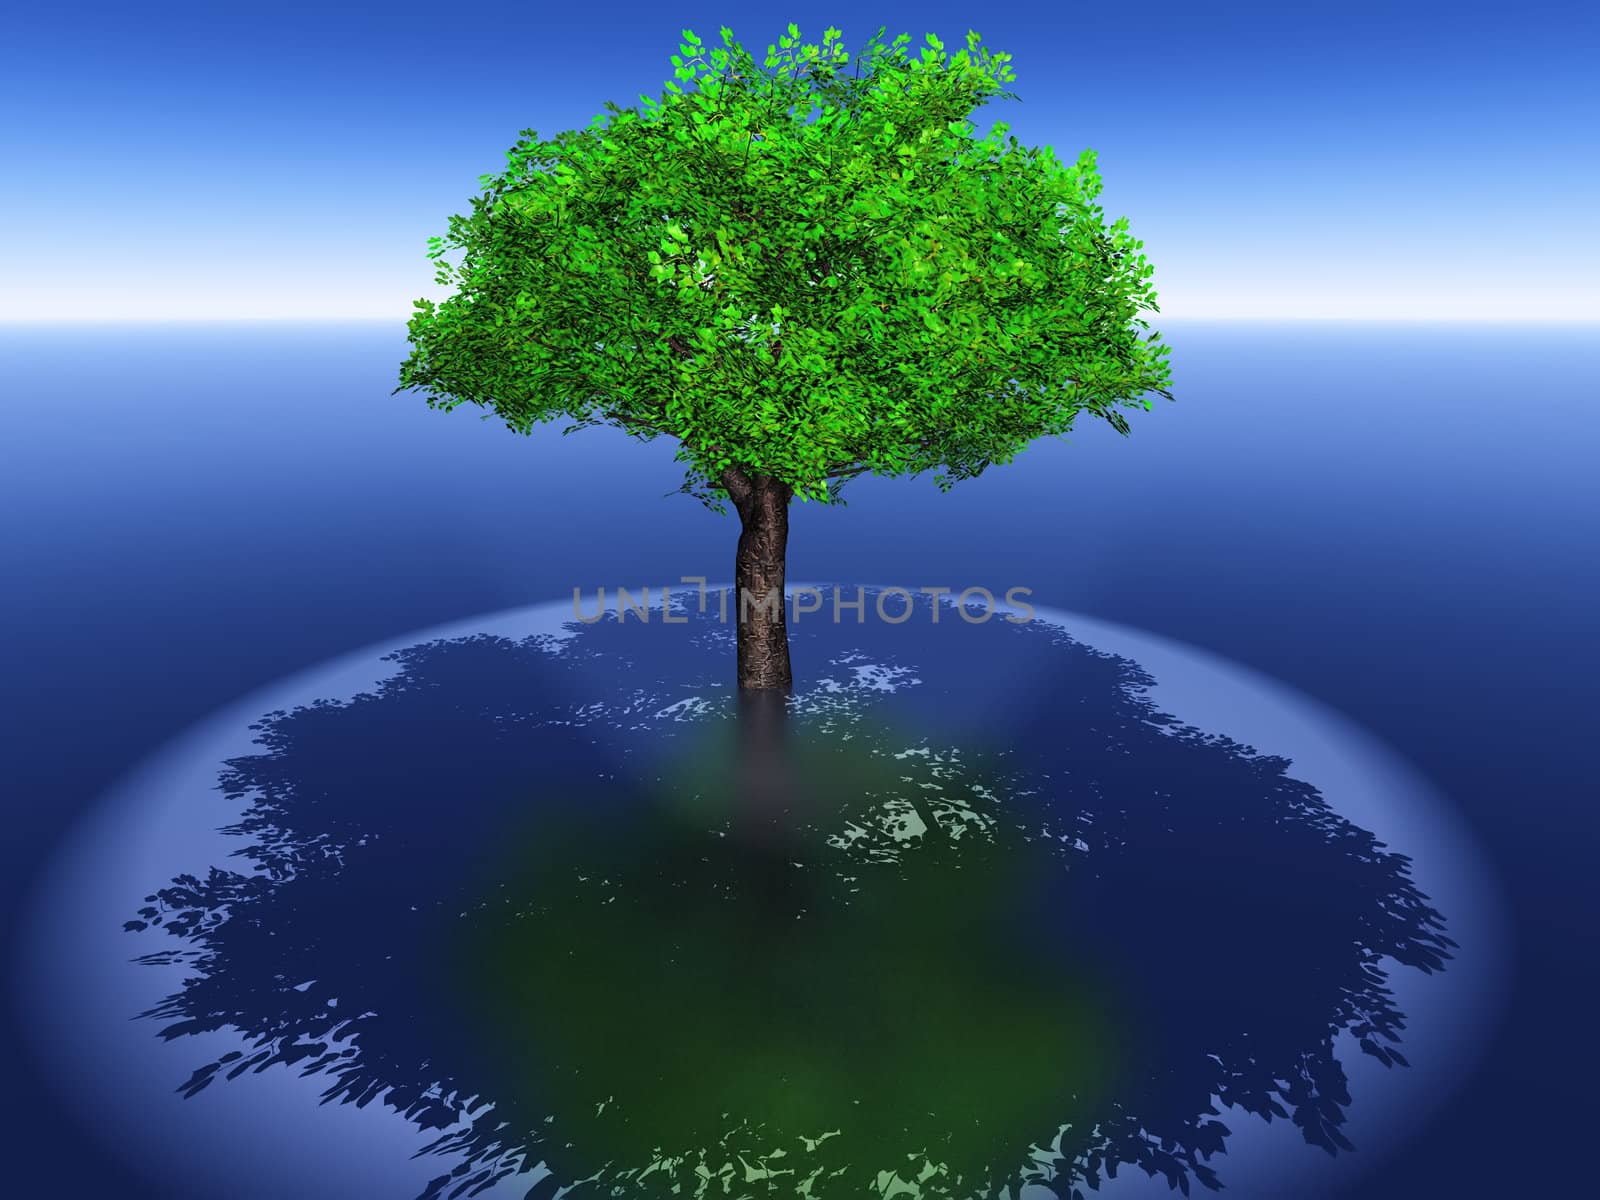 the green tree and its shadow by njaj